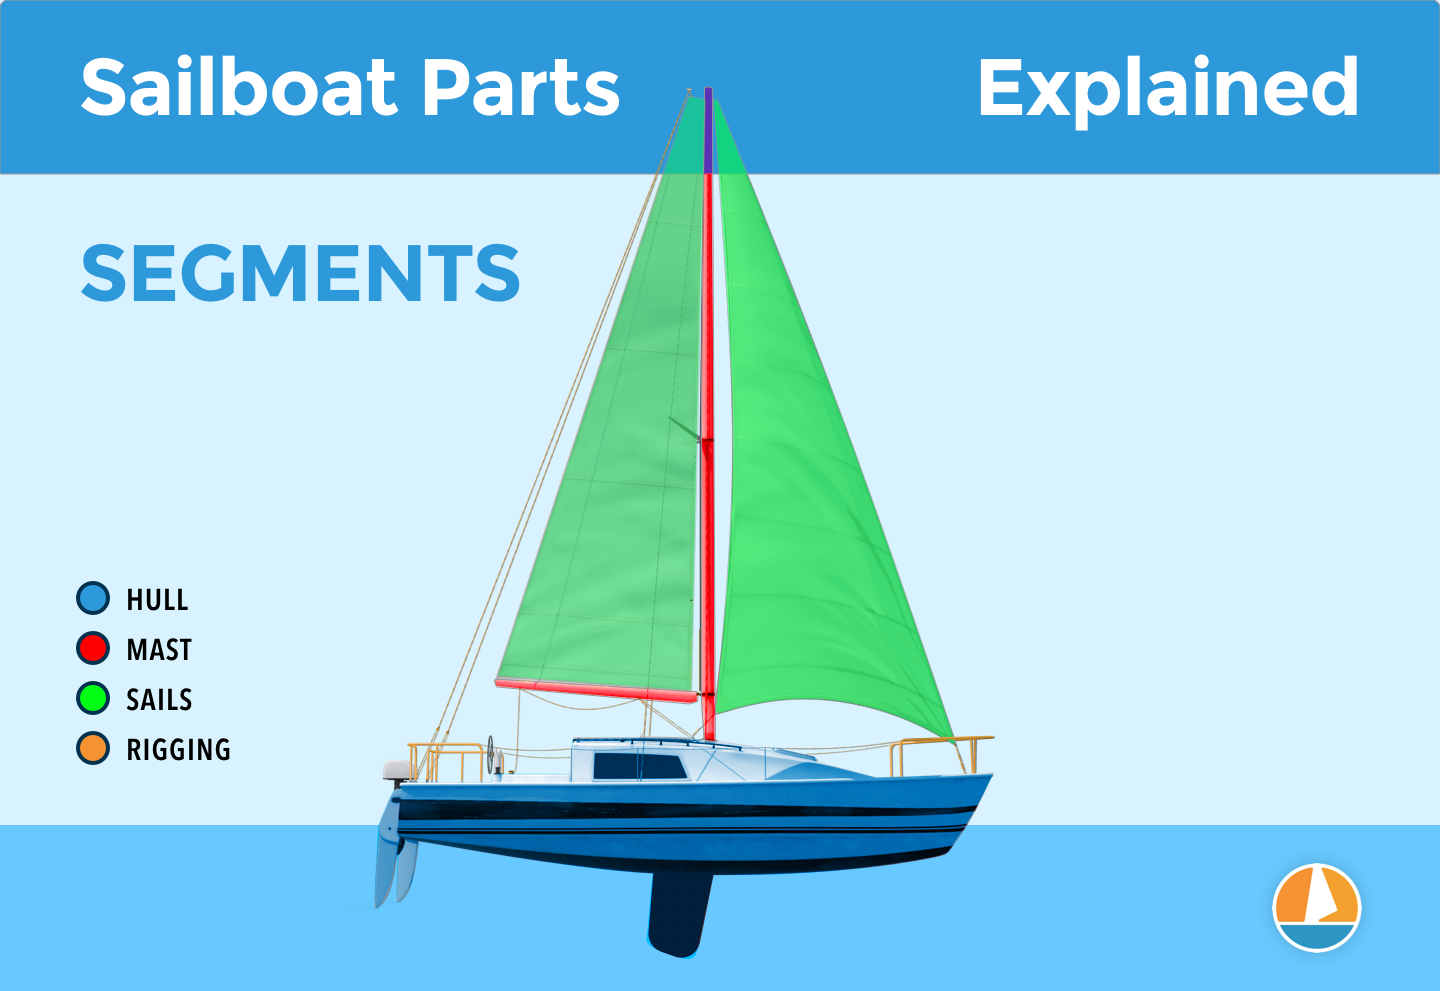 Diagram of the four main parts categories of a sailboat